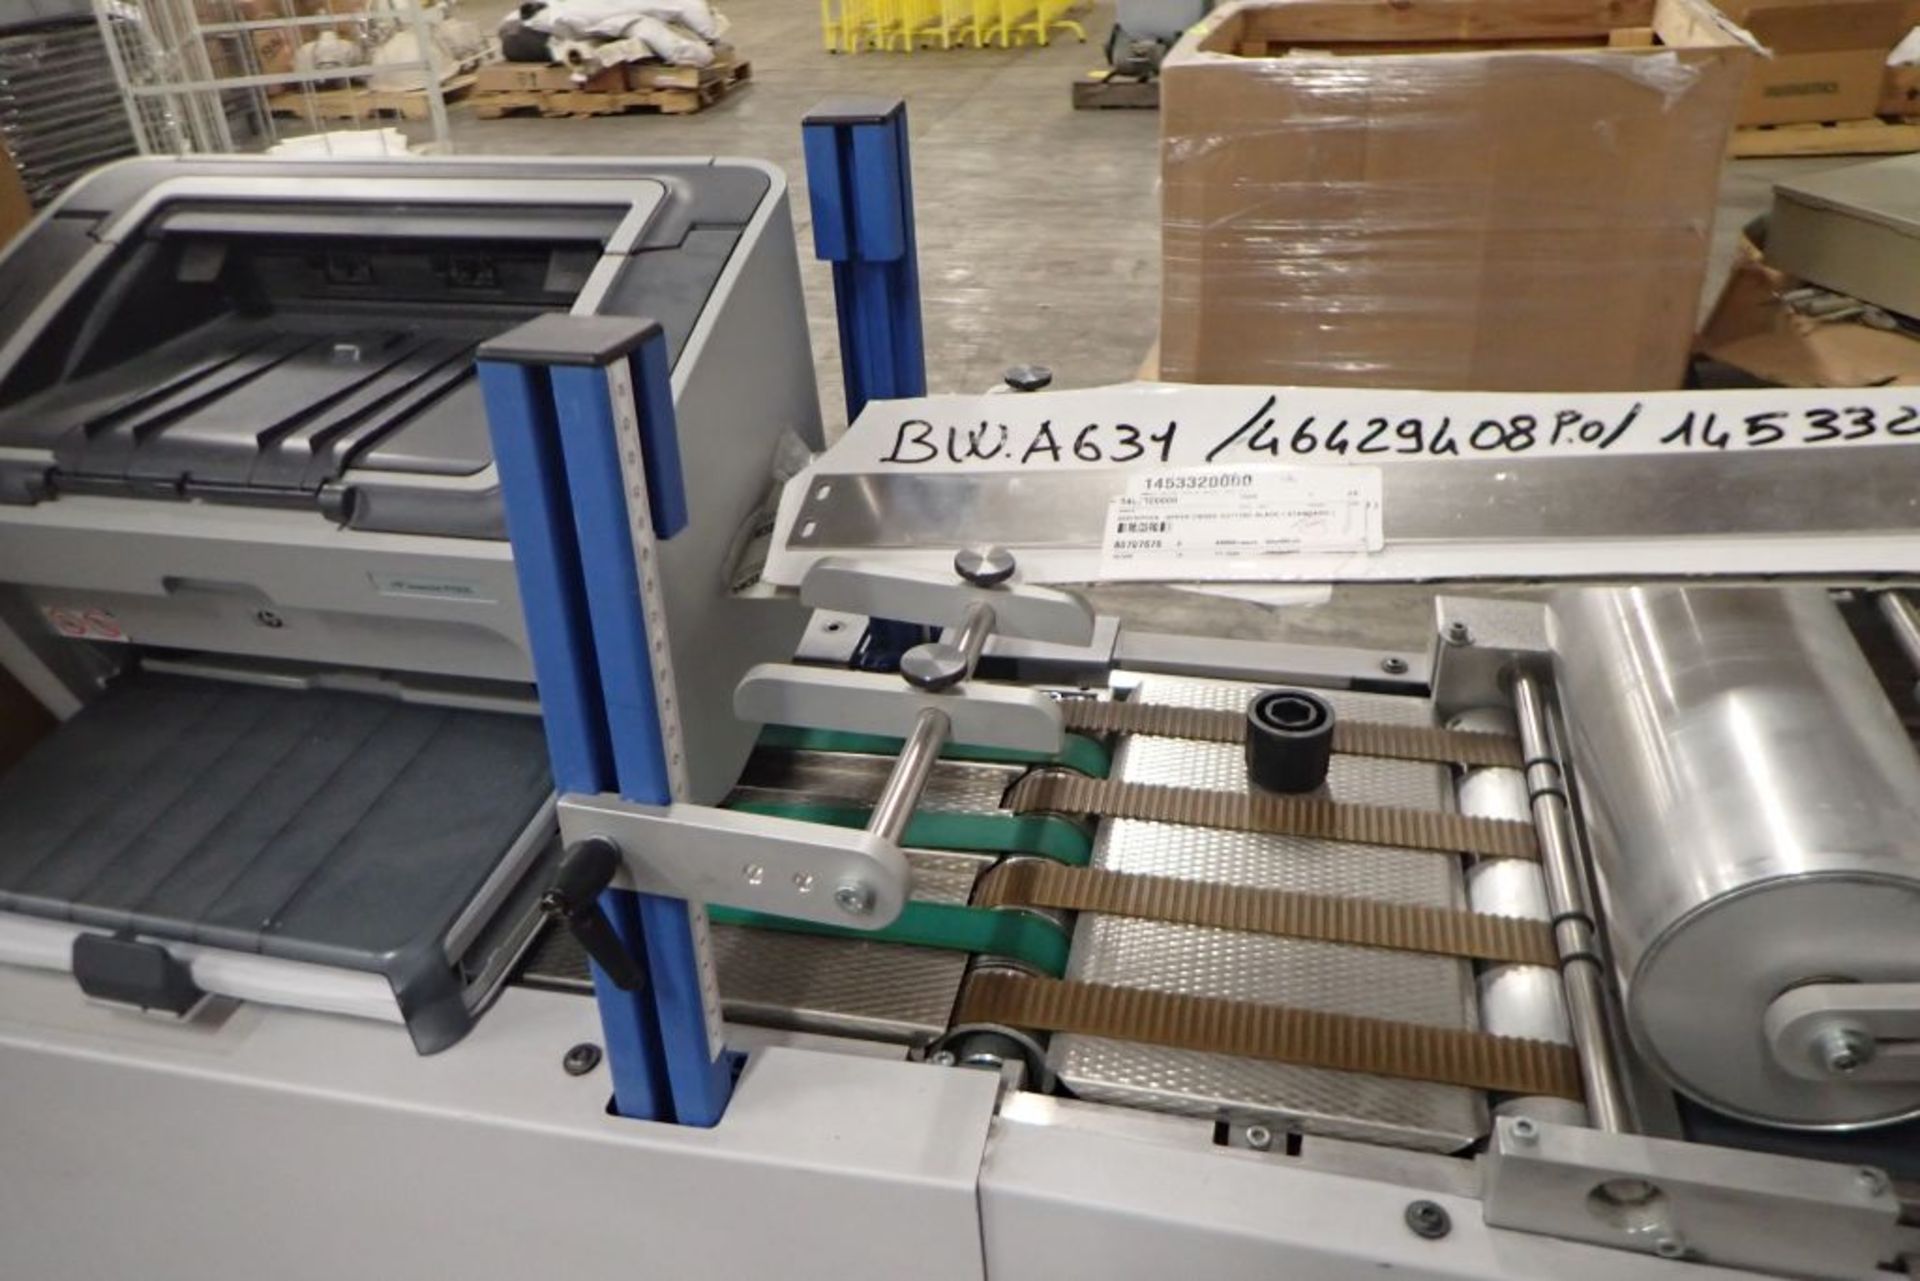 Bowe Systec Turbo Premium Automatic Mailing System - Image 157 of 297